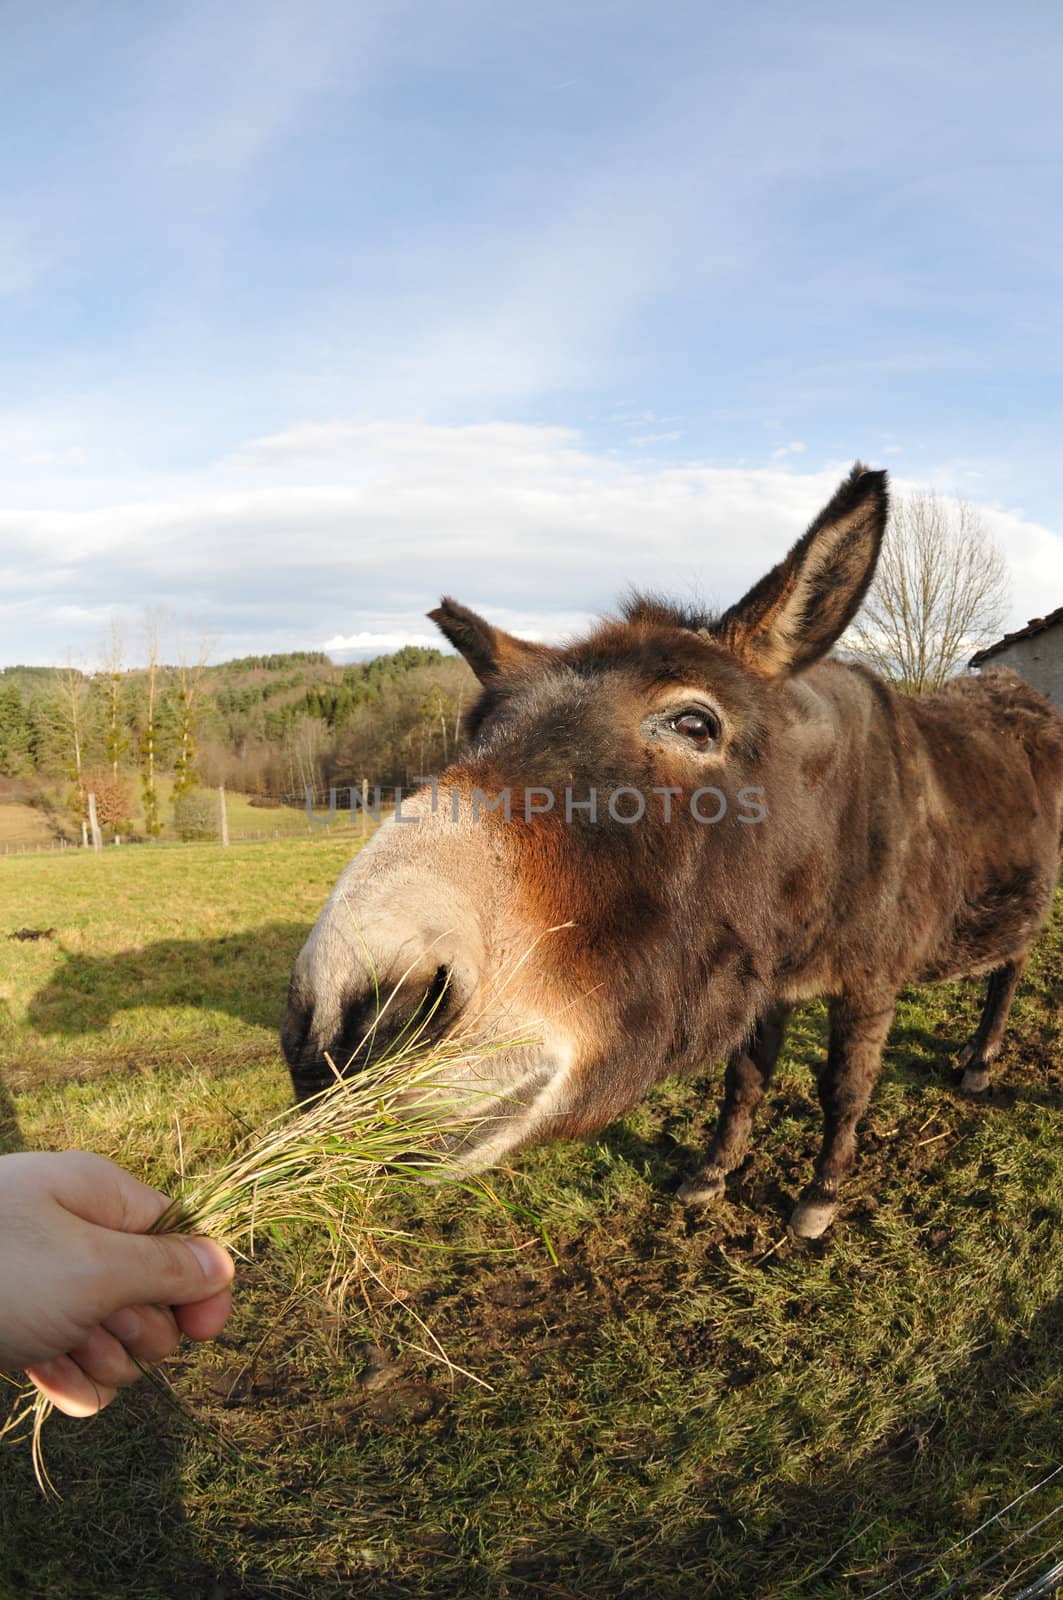 Head of a Donkey which Eating Grass tuft by shkyo30